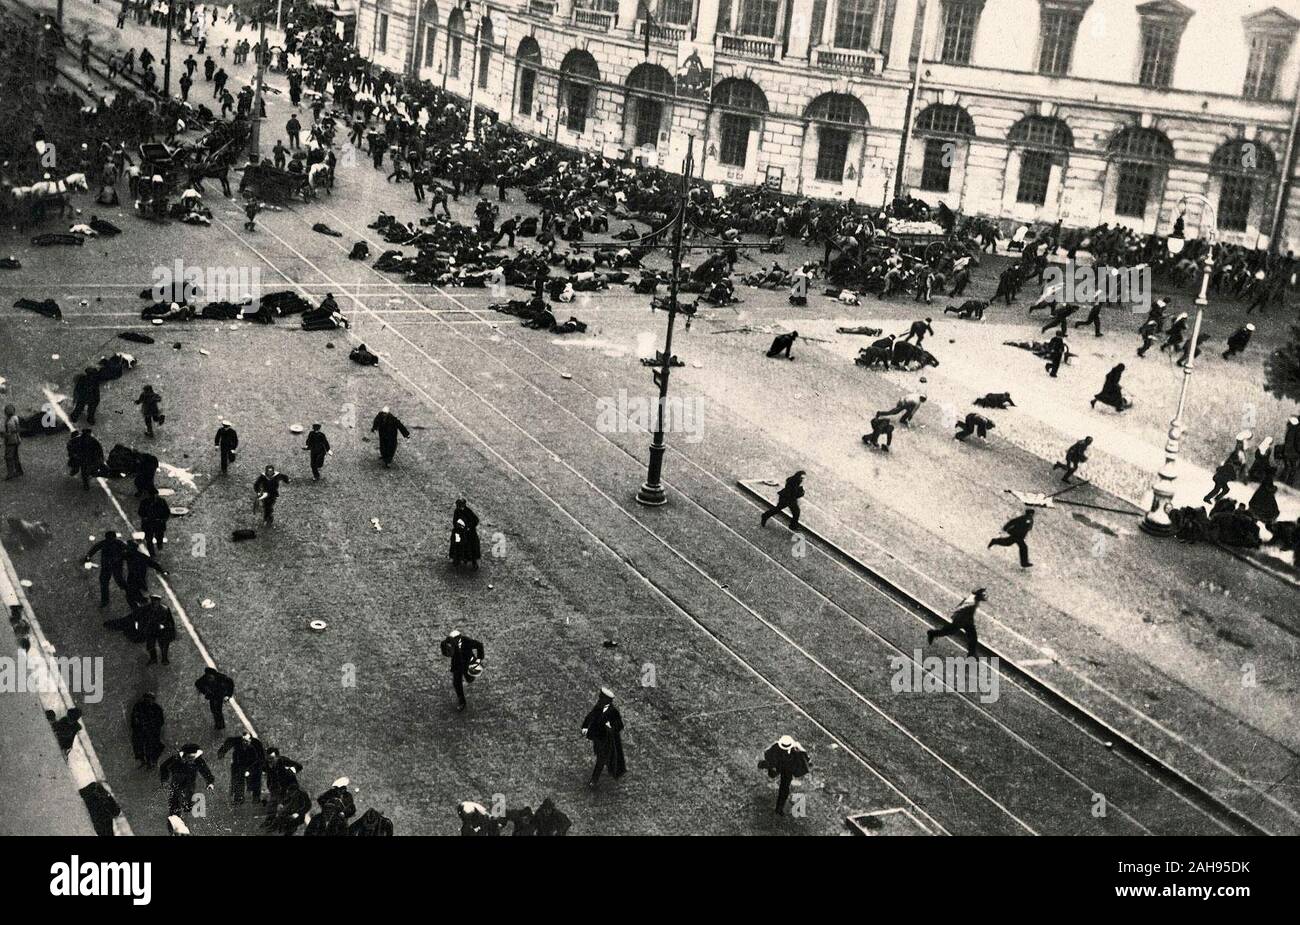 Petrograd (Saint Petersburg), July 4, 1917 2PM. Street demonstration on Nevsky Prospekt just after troops of the Provisional Government have opened fire with machine guns. Stock Photo